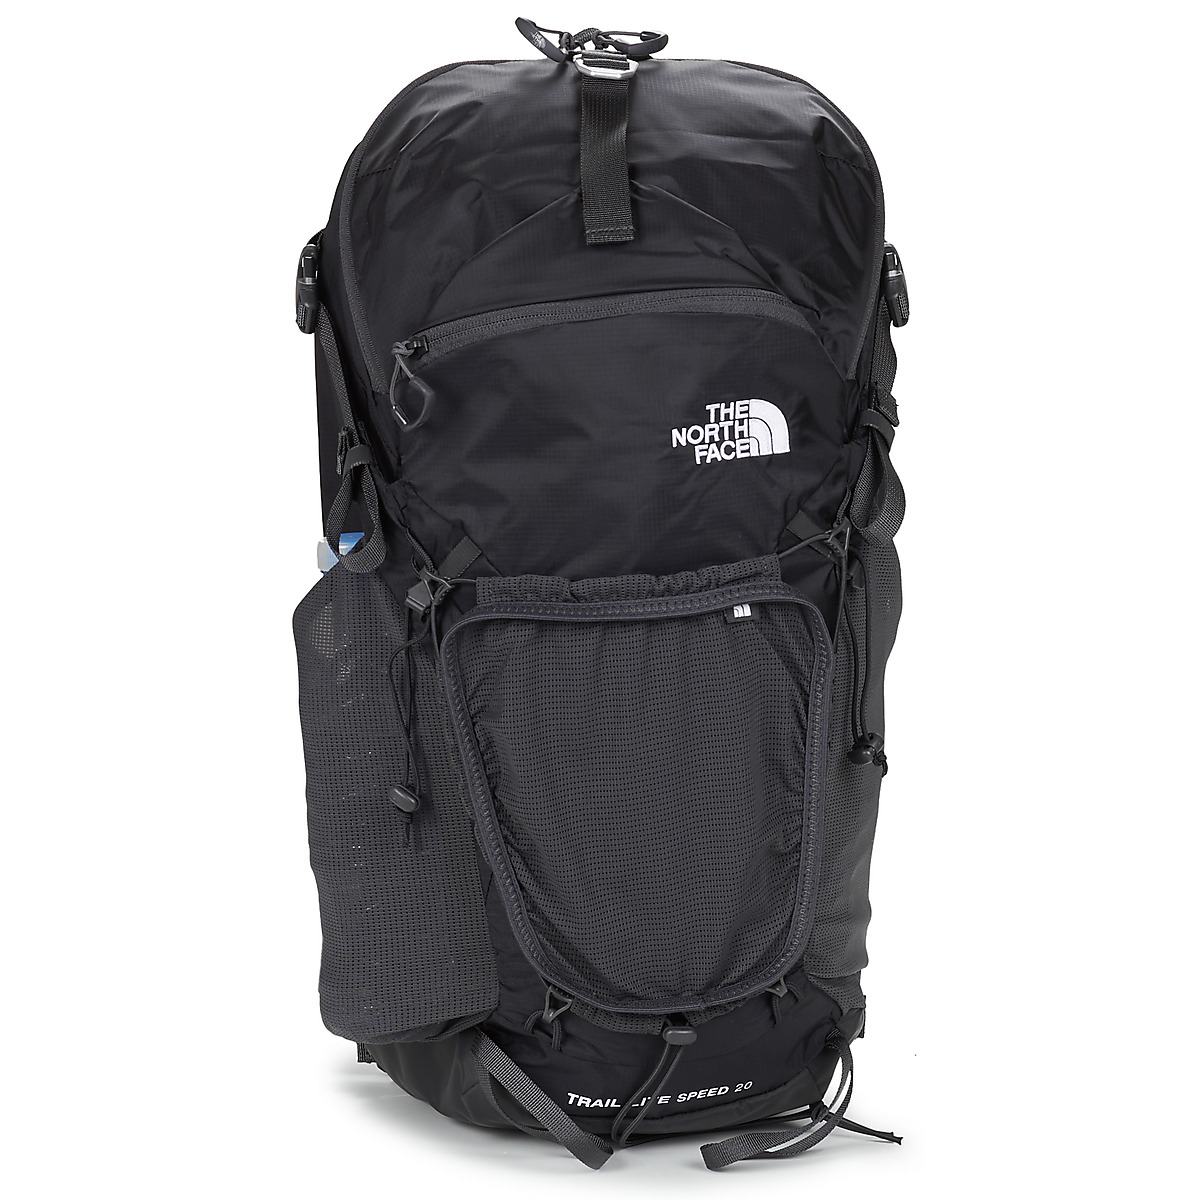 The North Face Noir / Gris TRAIL LITE SPEED 20 UFyFWEly